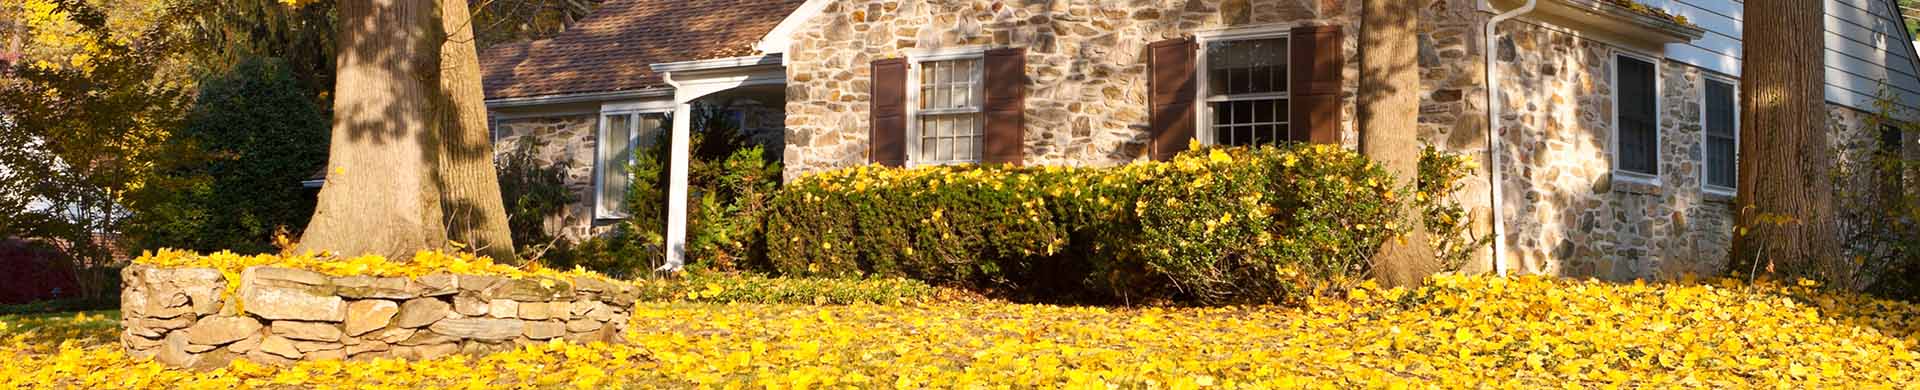 Stone House with Yard Covered in Yellow Leaves